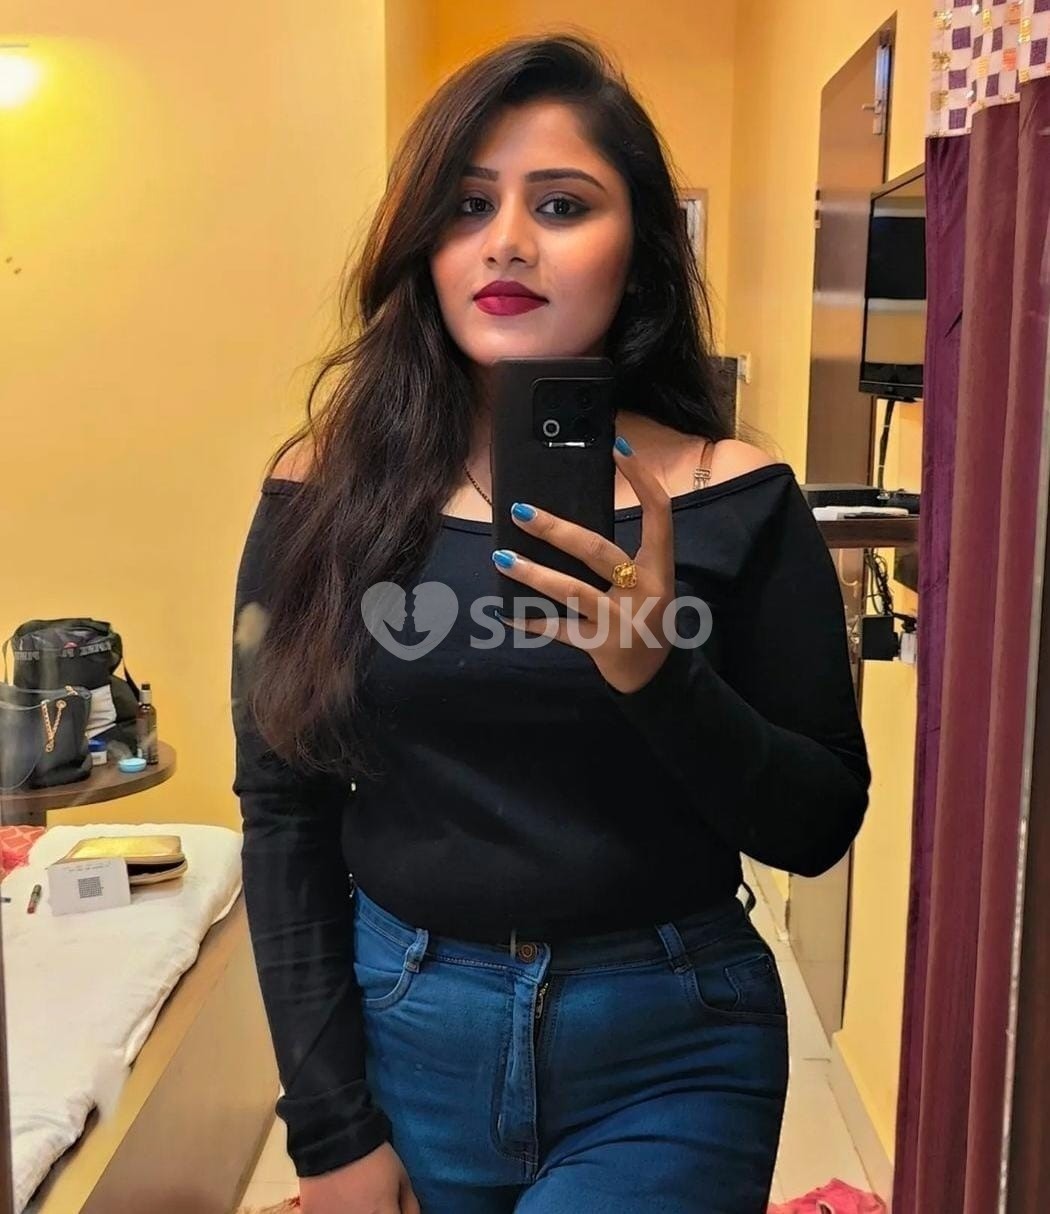 ASTHA GUNTUR JUICY ADULT CLASSIFIED FIND HOT &HORNY STUFF NEAR YOU OUTCALL INCALL AFFORDABLE PRICE WHATSAPP 95710-81977